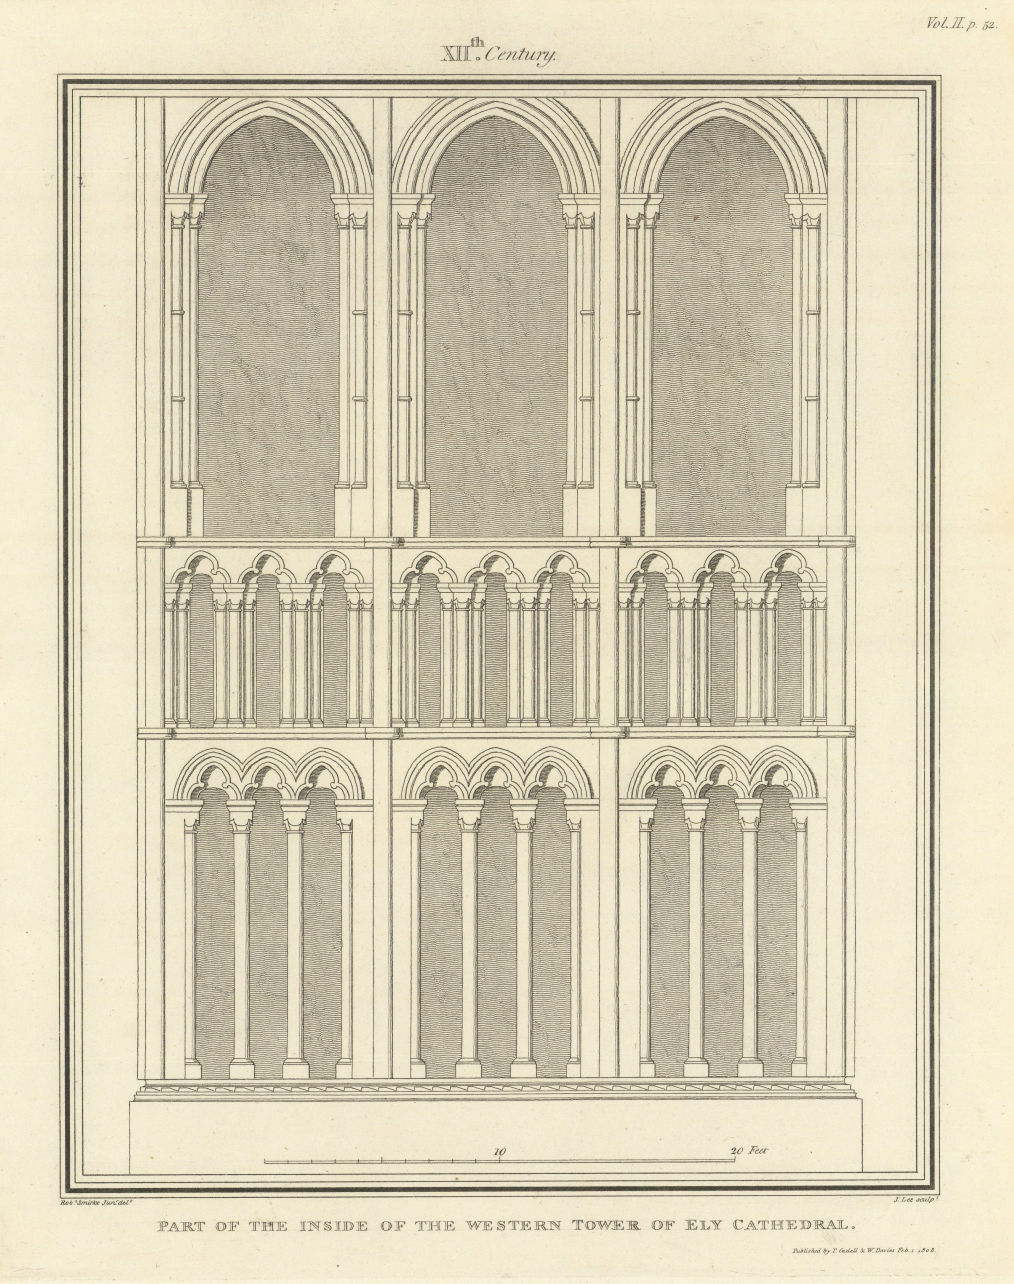 Associate Product Part of the inside of the Western Tower of Ely Cathedral. SMIRKE 1810 print